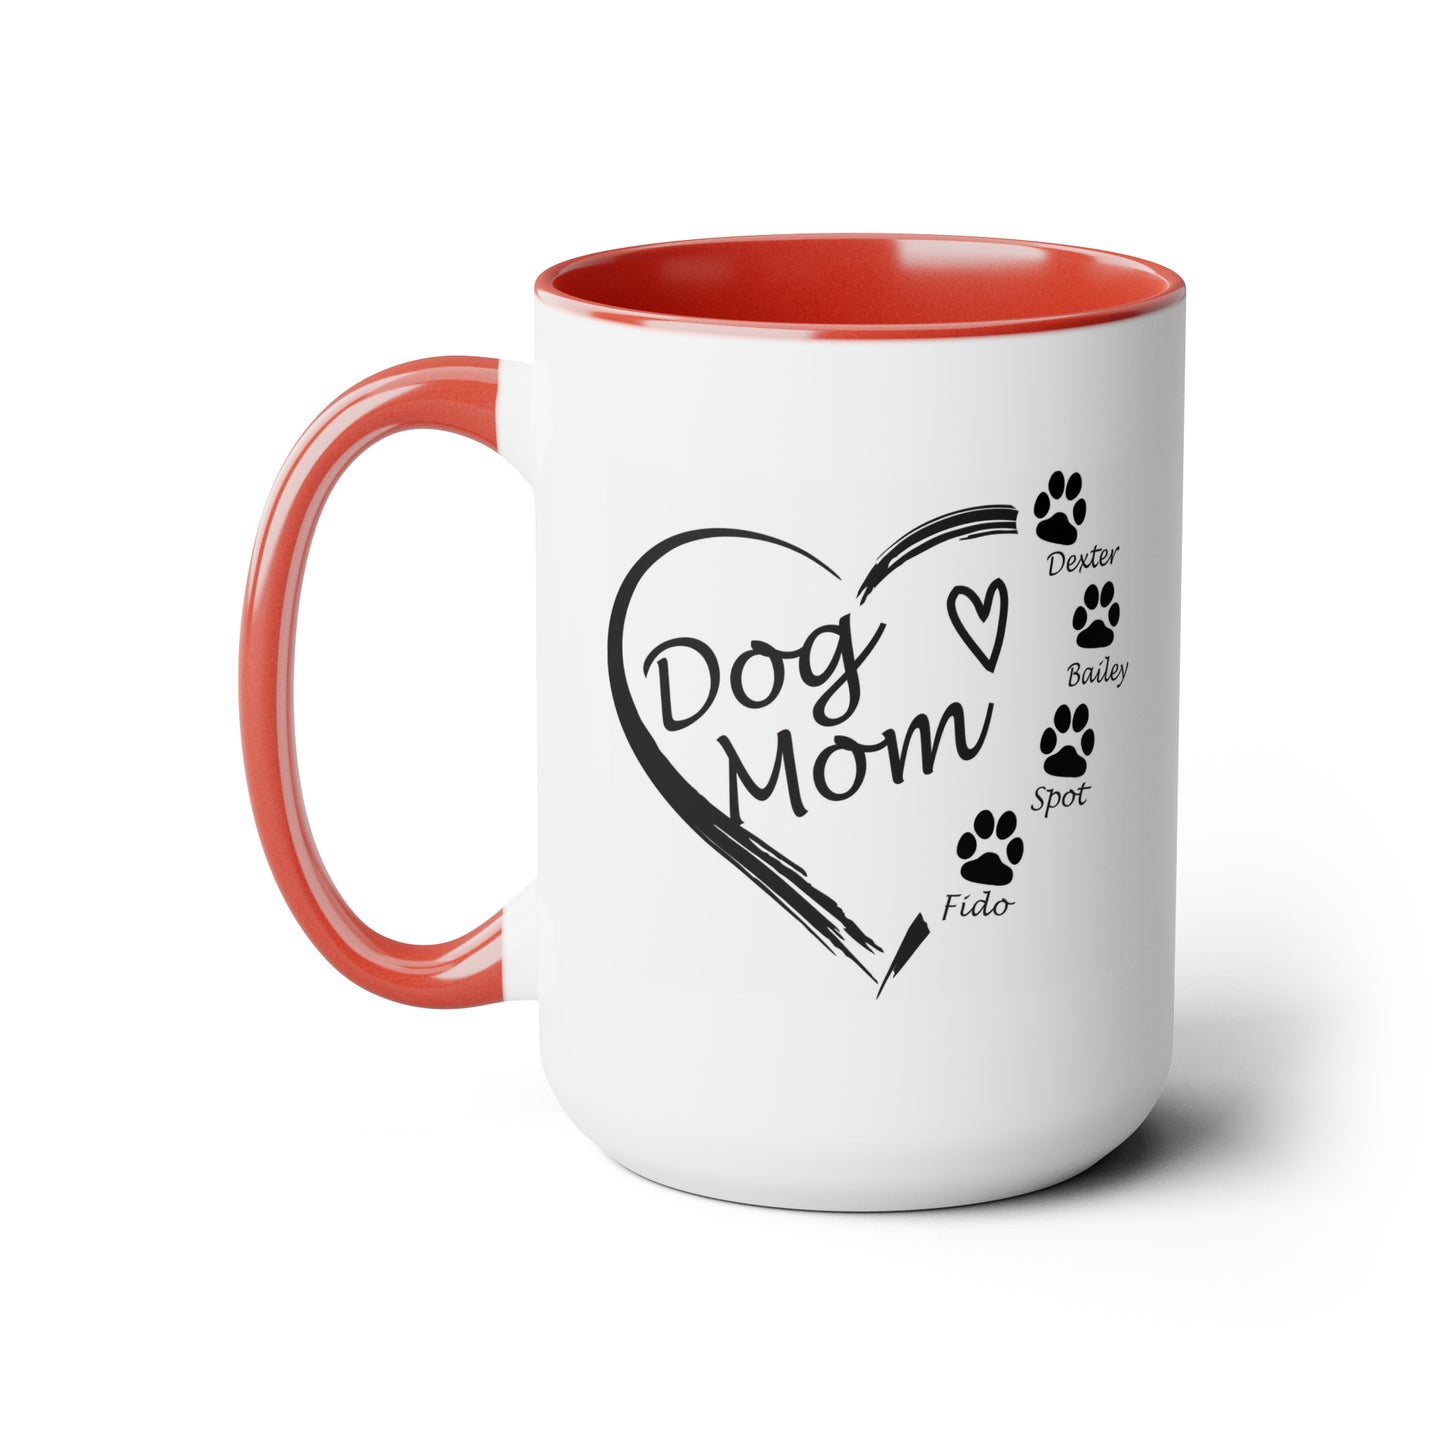 Dog Mom Personalized Coffee Mugs with image on both sides